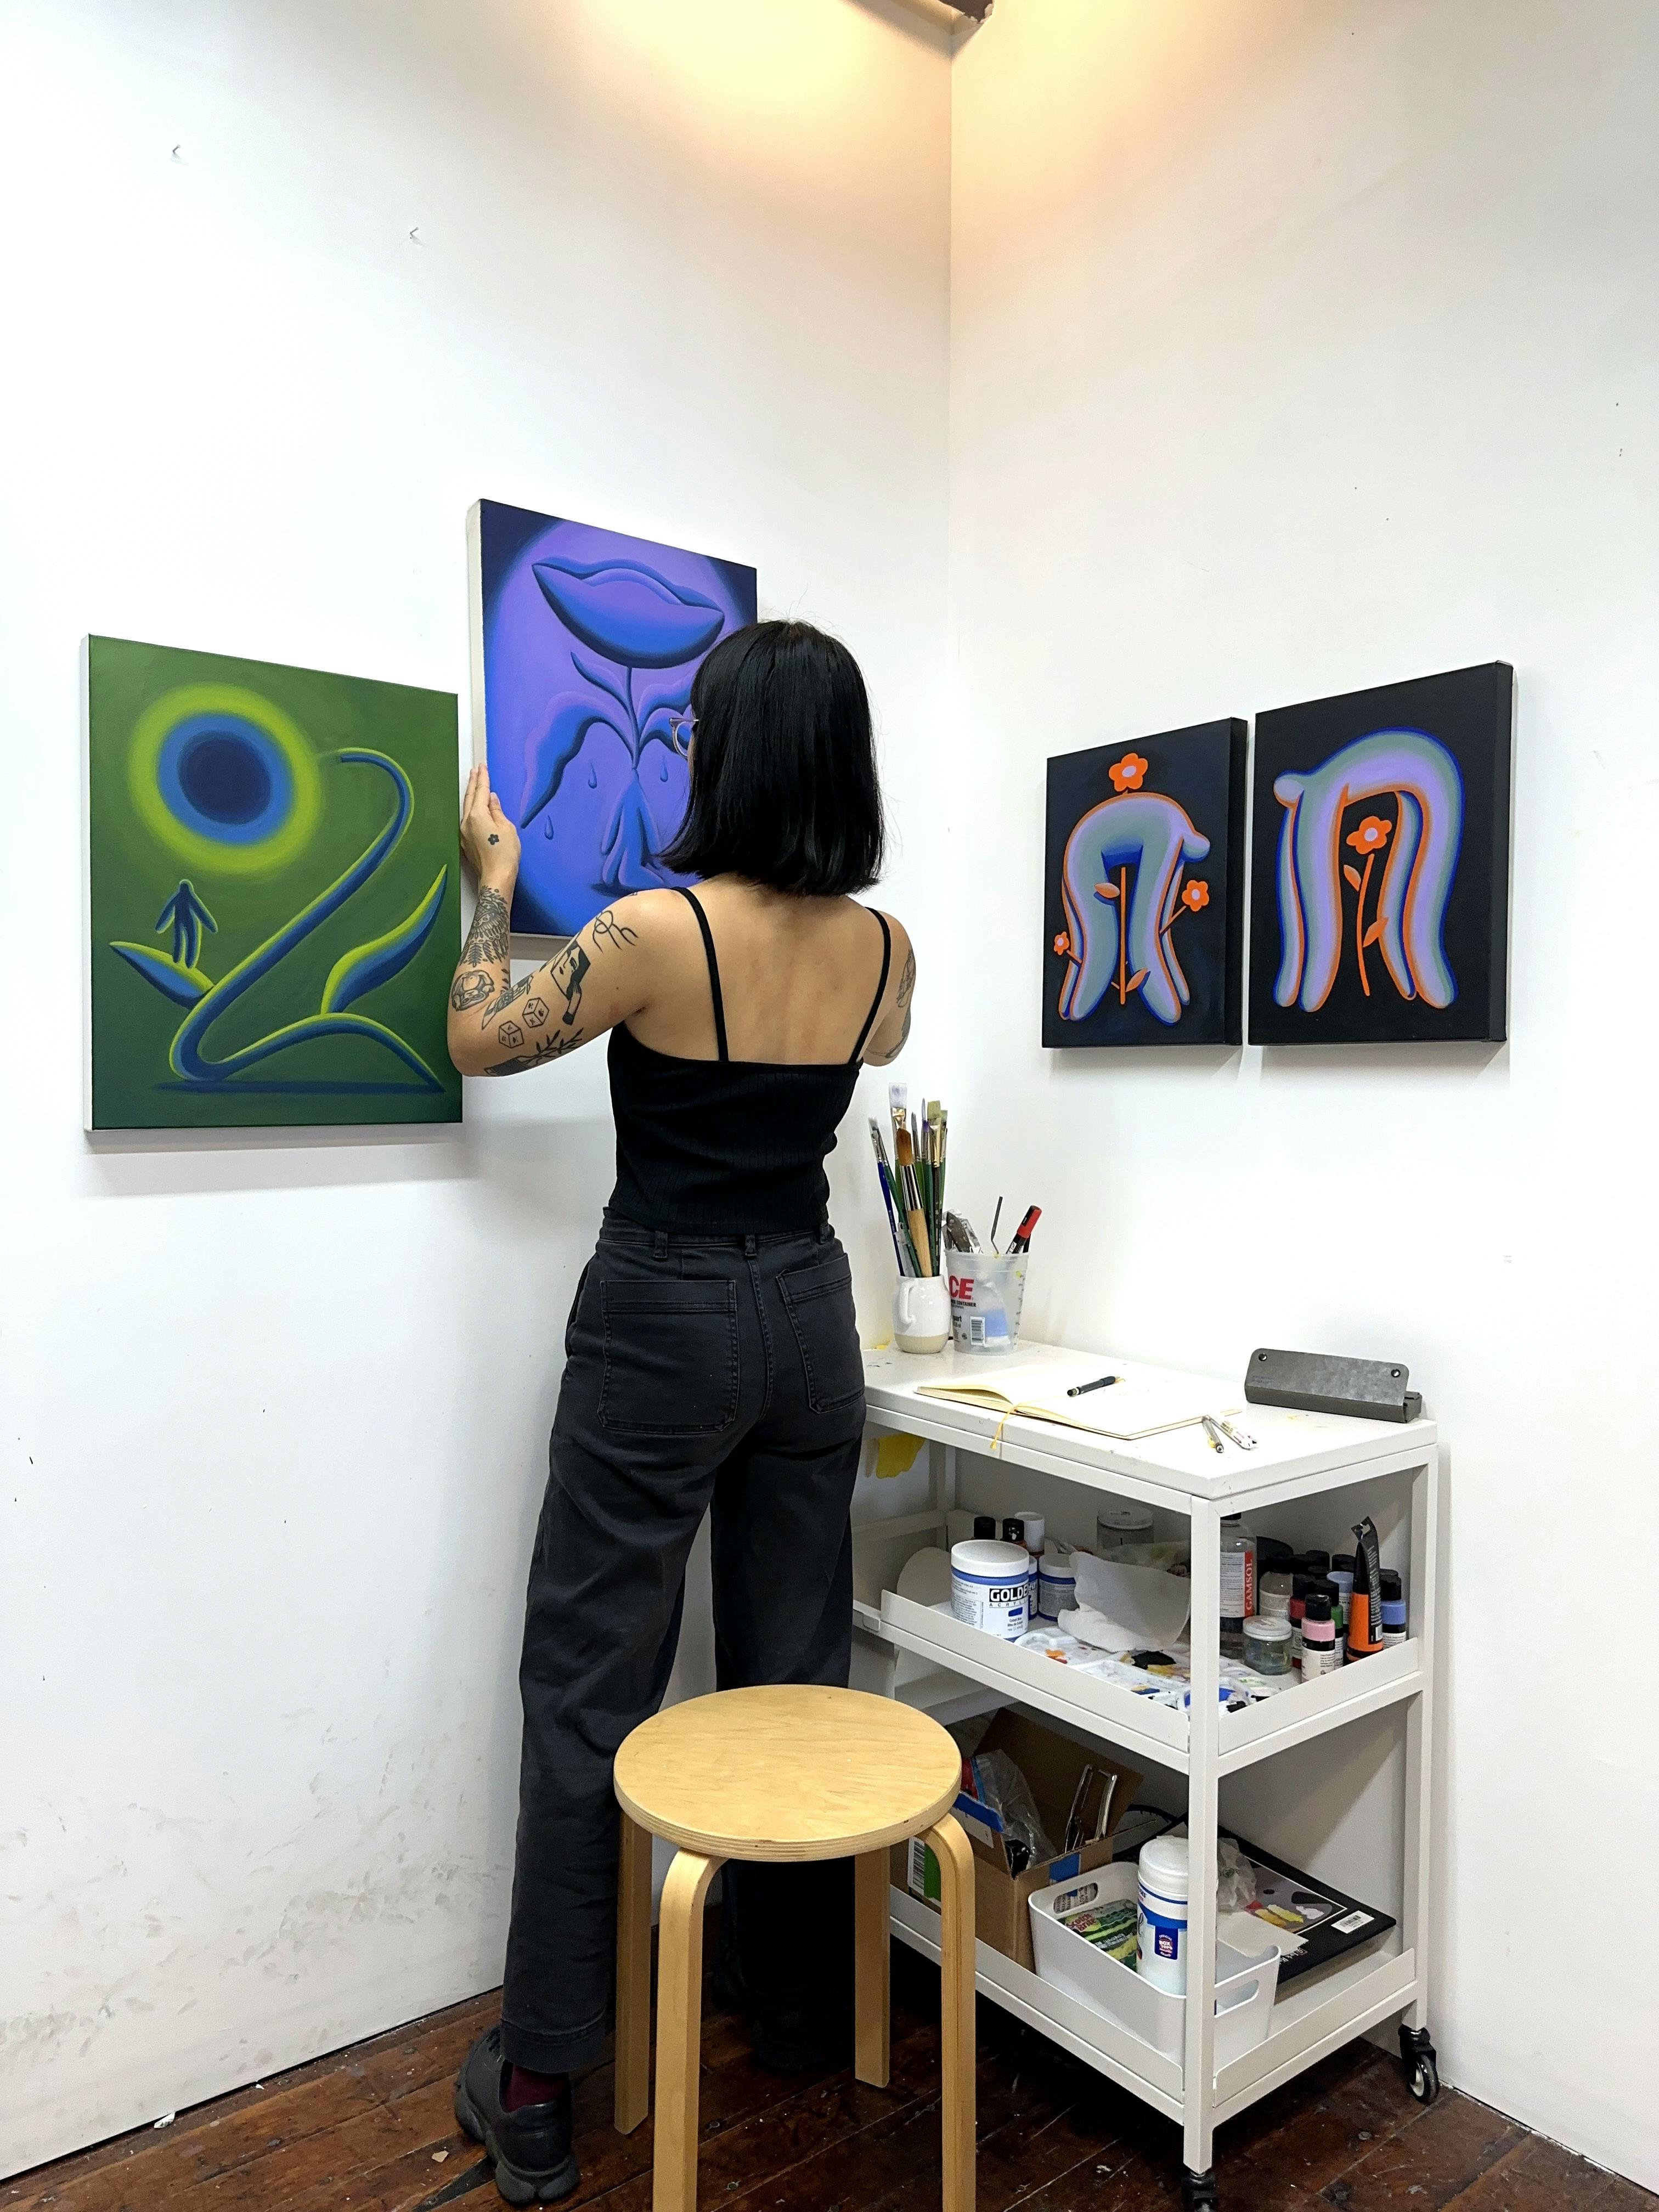 Artist Jocelyn Tsaih hanging up a purple painting next to other paintings on a white wall in her studio.